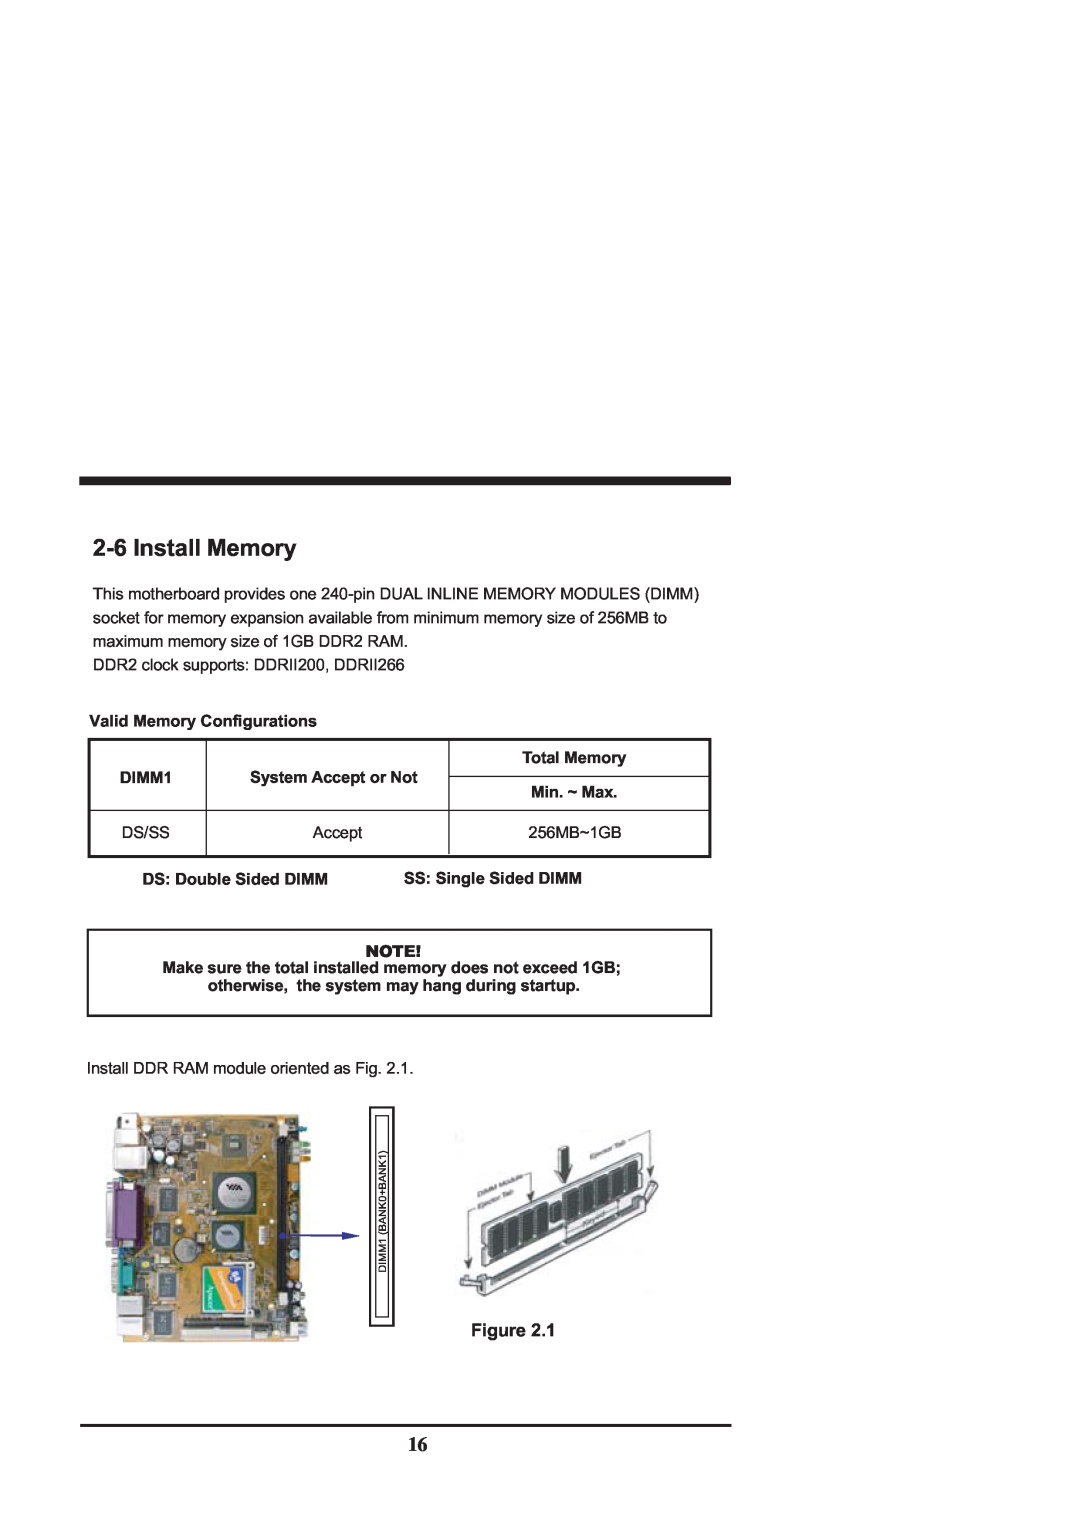 Intel CV700A 2-6Install Memory, Figure, Valid Memory Configurations, Total Memory, DIMM1, System Accept or Not, Min. ~ Max 